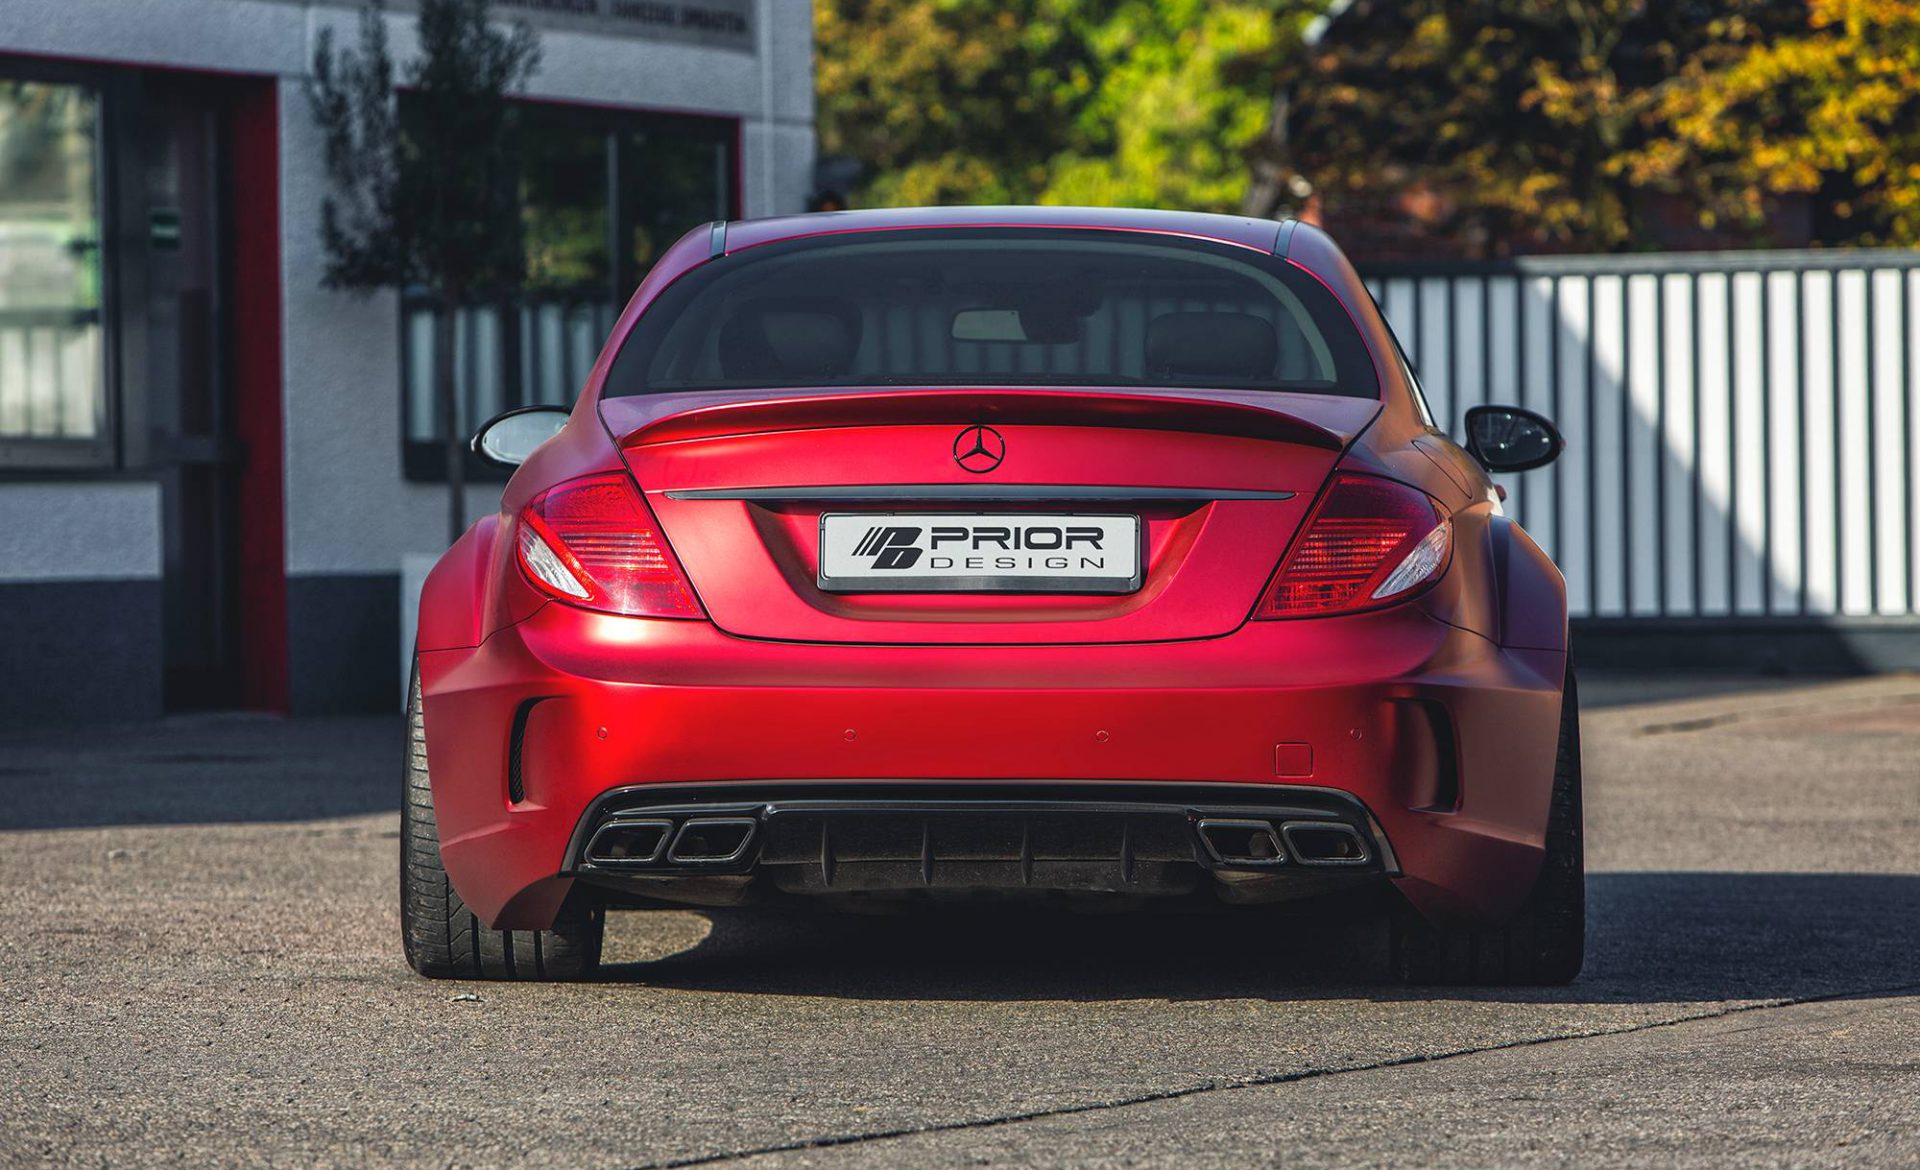 Mercedes CL C216 Tuning - PD Black Edition V4 Widebody Kit